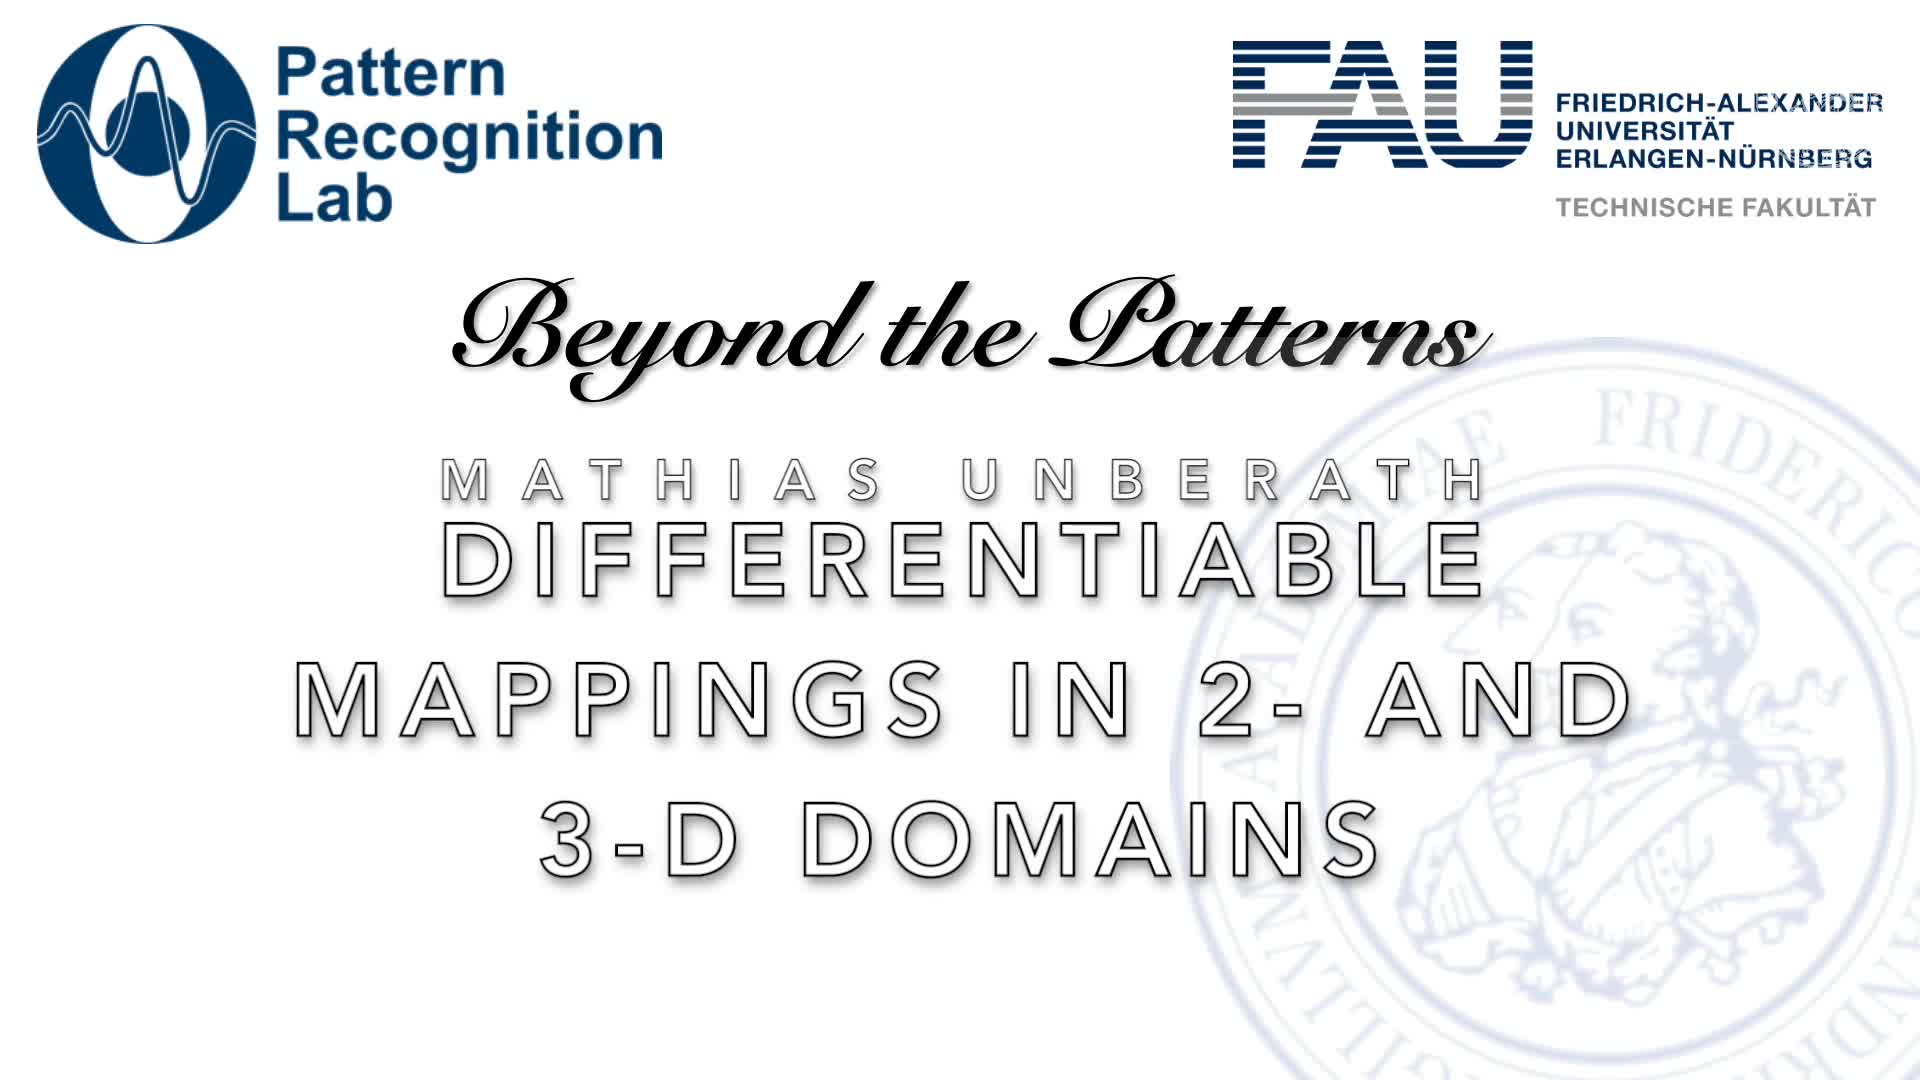 Beyond the Patterns - Mathias Unberath - Bridging Domains in Medical Imaging — Differentiable Mappings Between 2- and 3-Dimensional Data Domains preview image